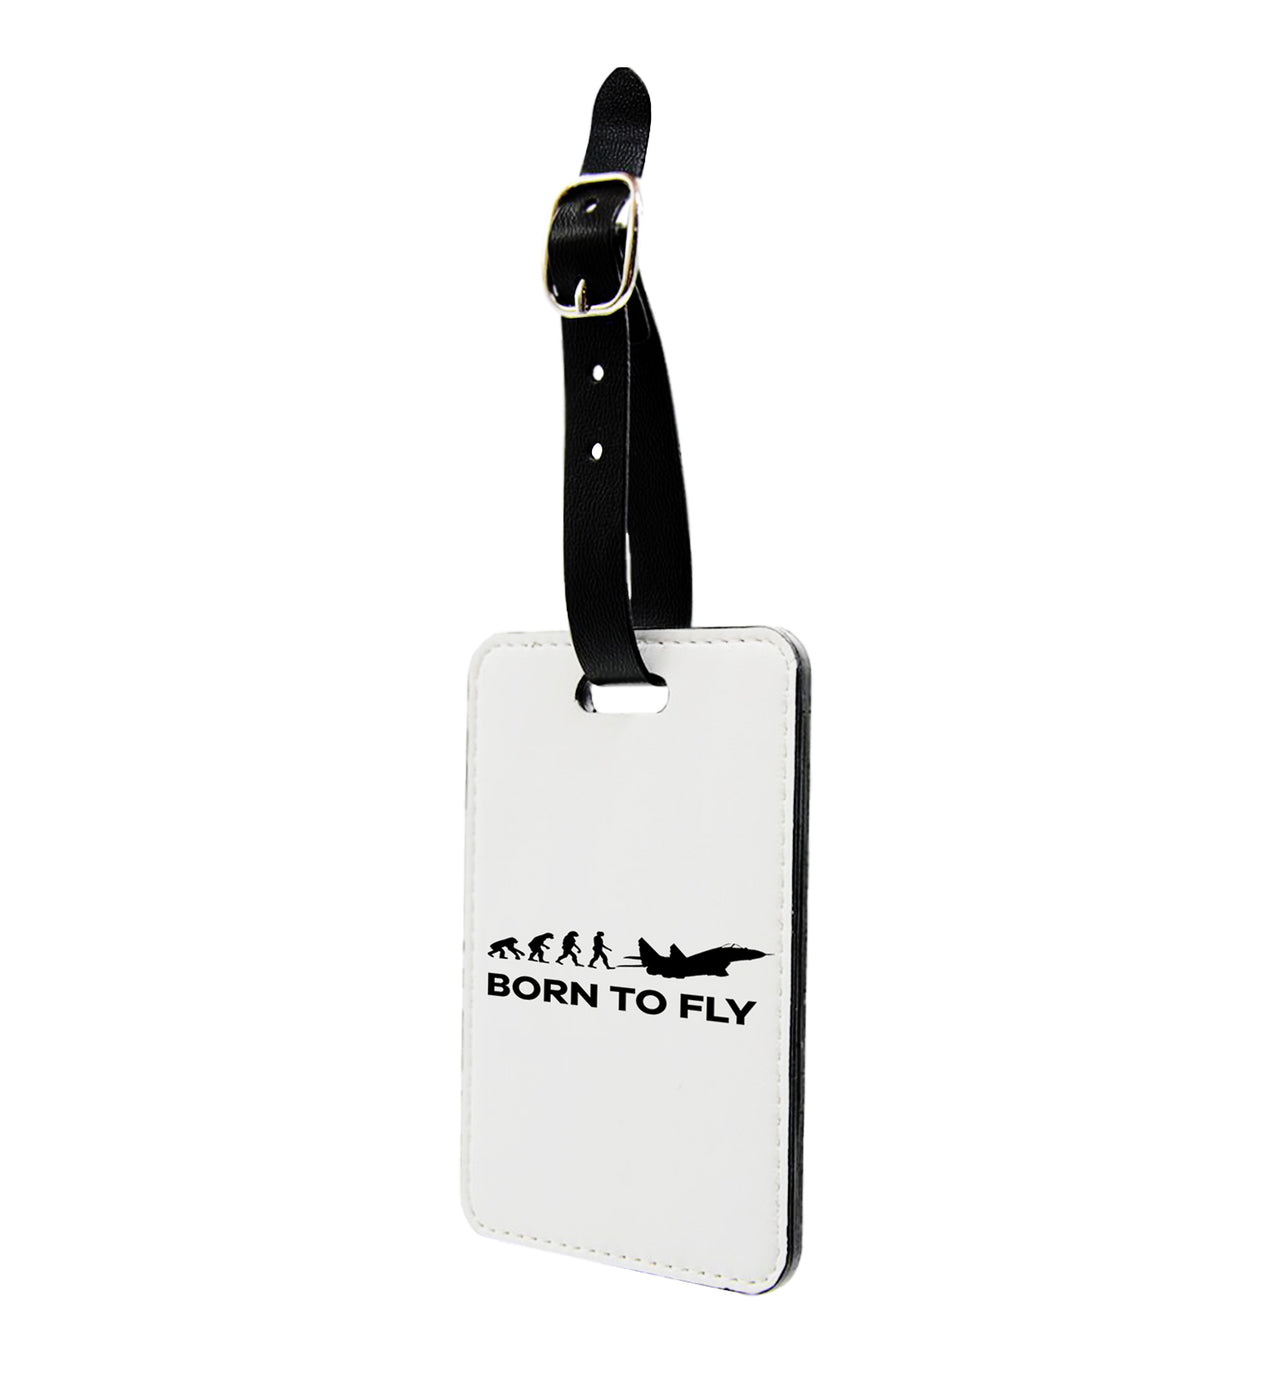 Born To Fly Military Designed Luggage Tag